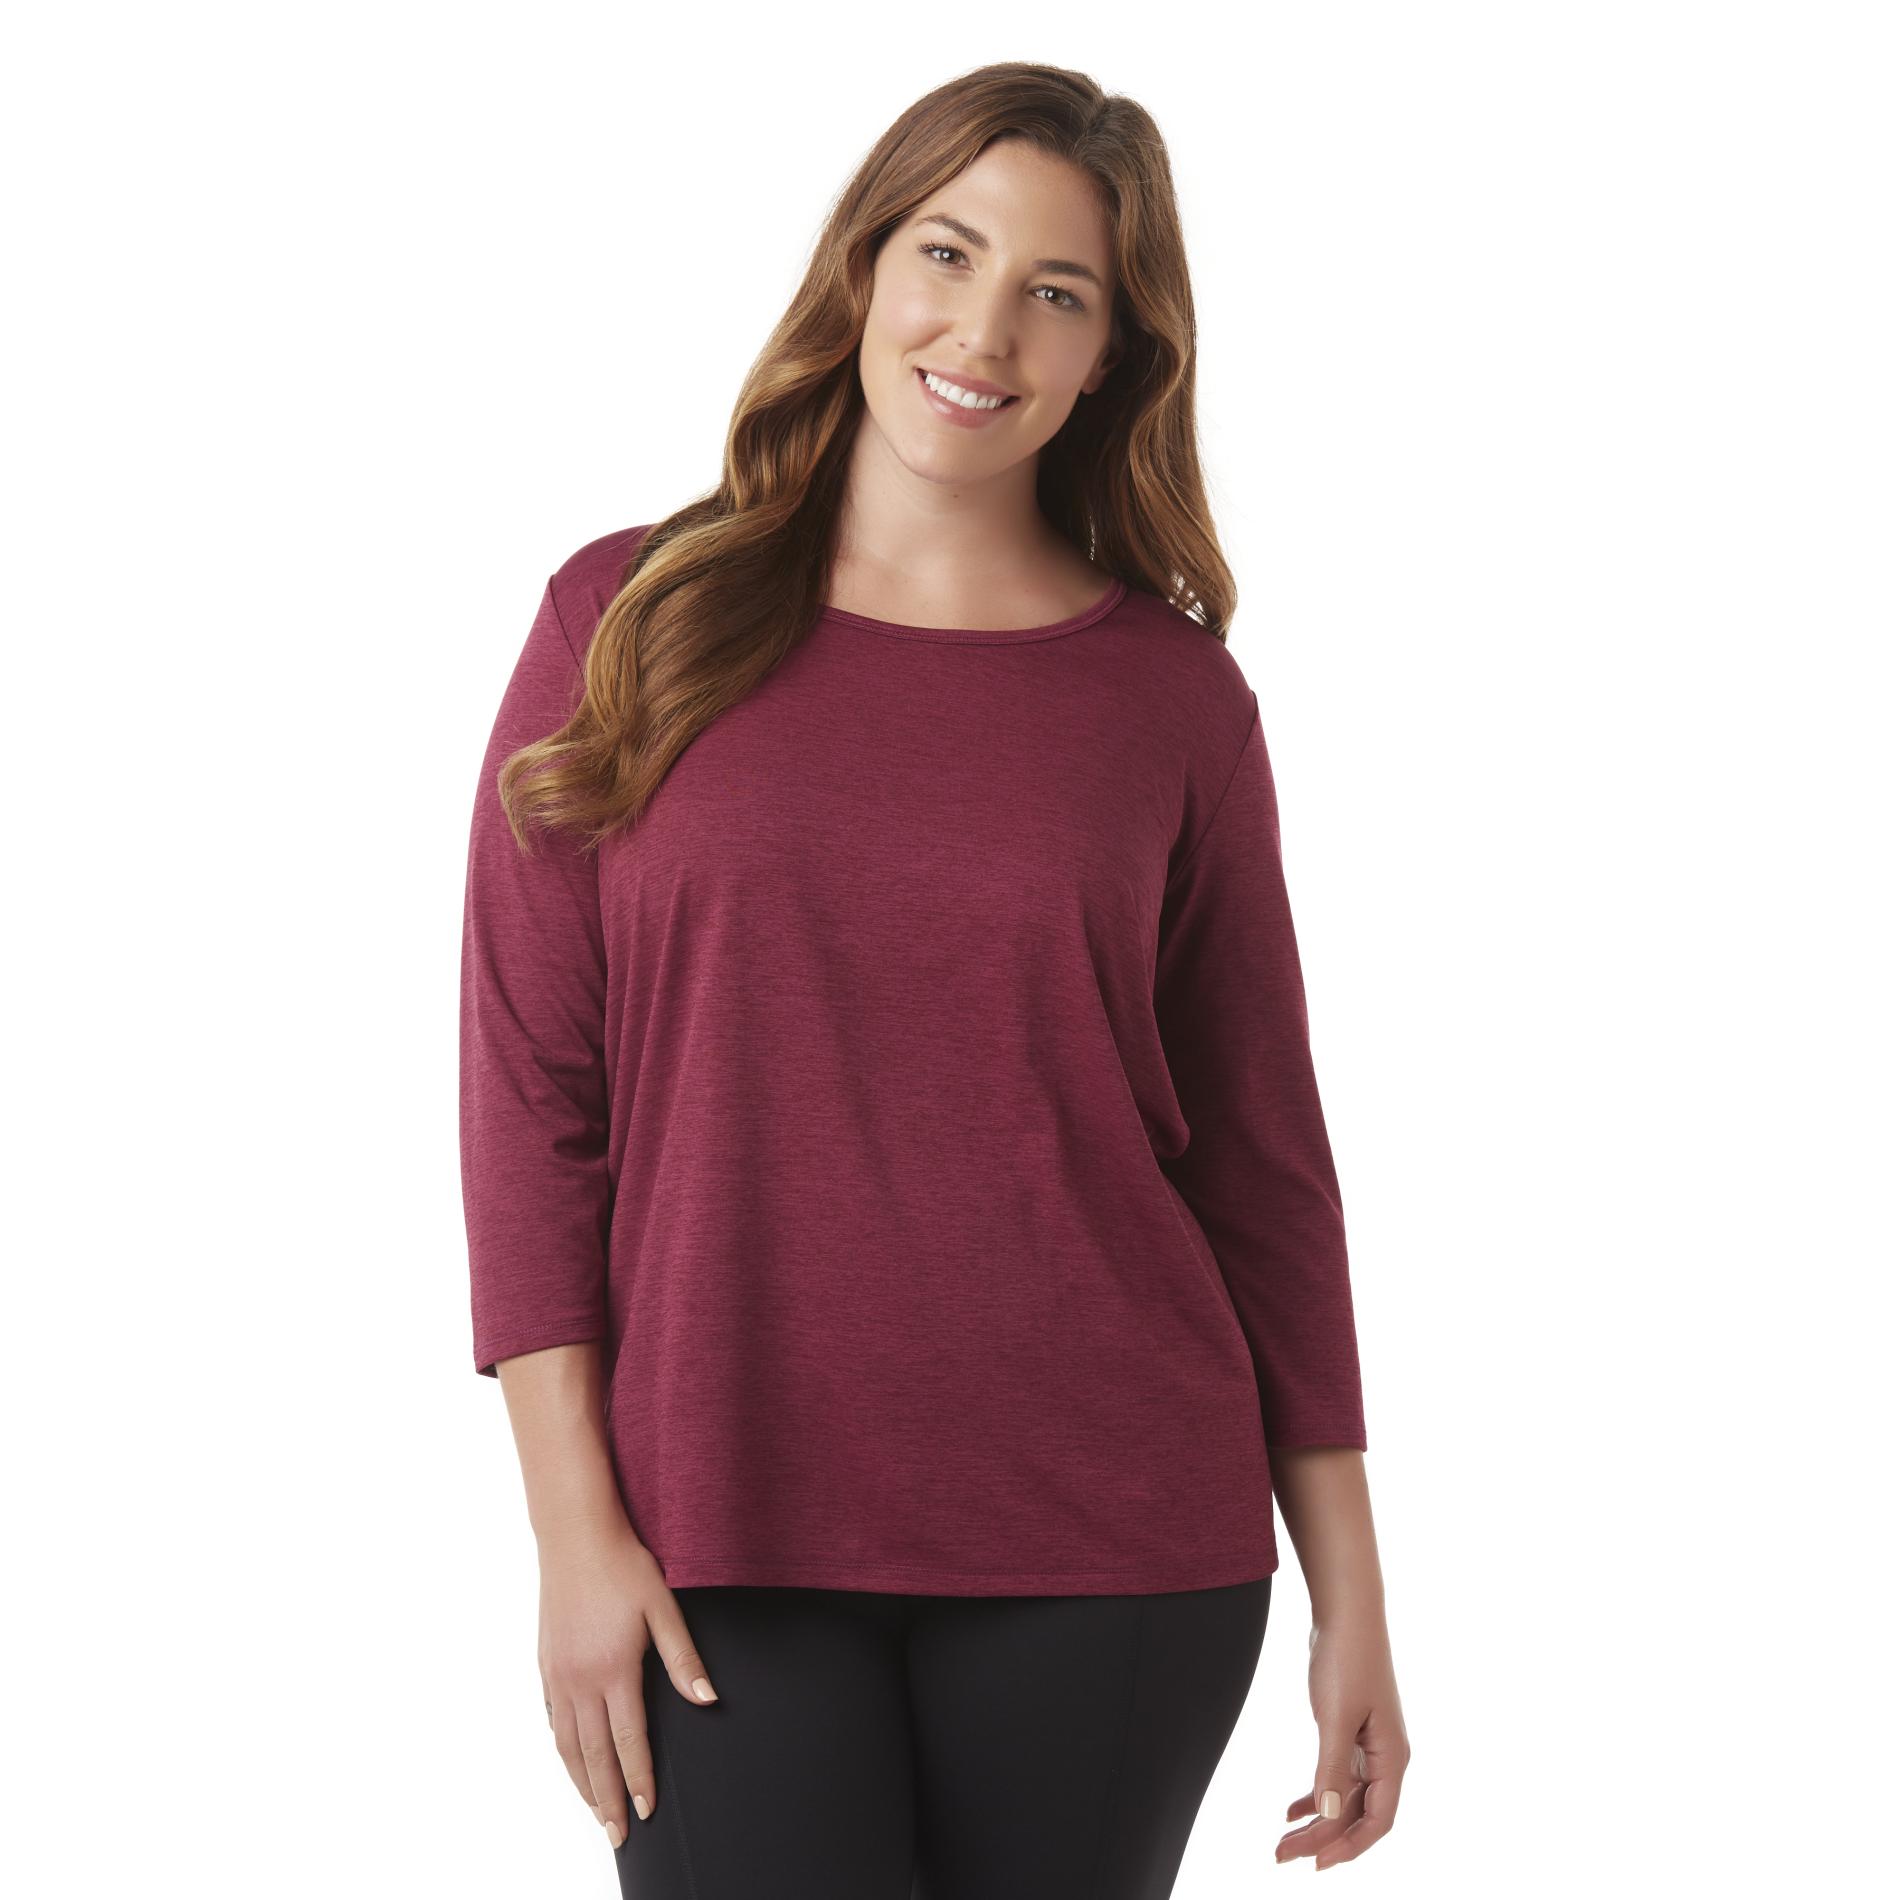 Simply Emma Women's Plus Performance Shirt - Space Dyed